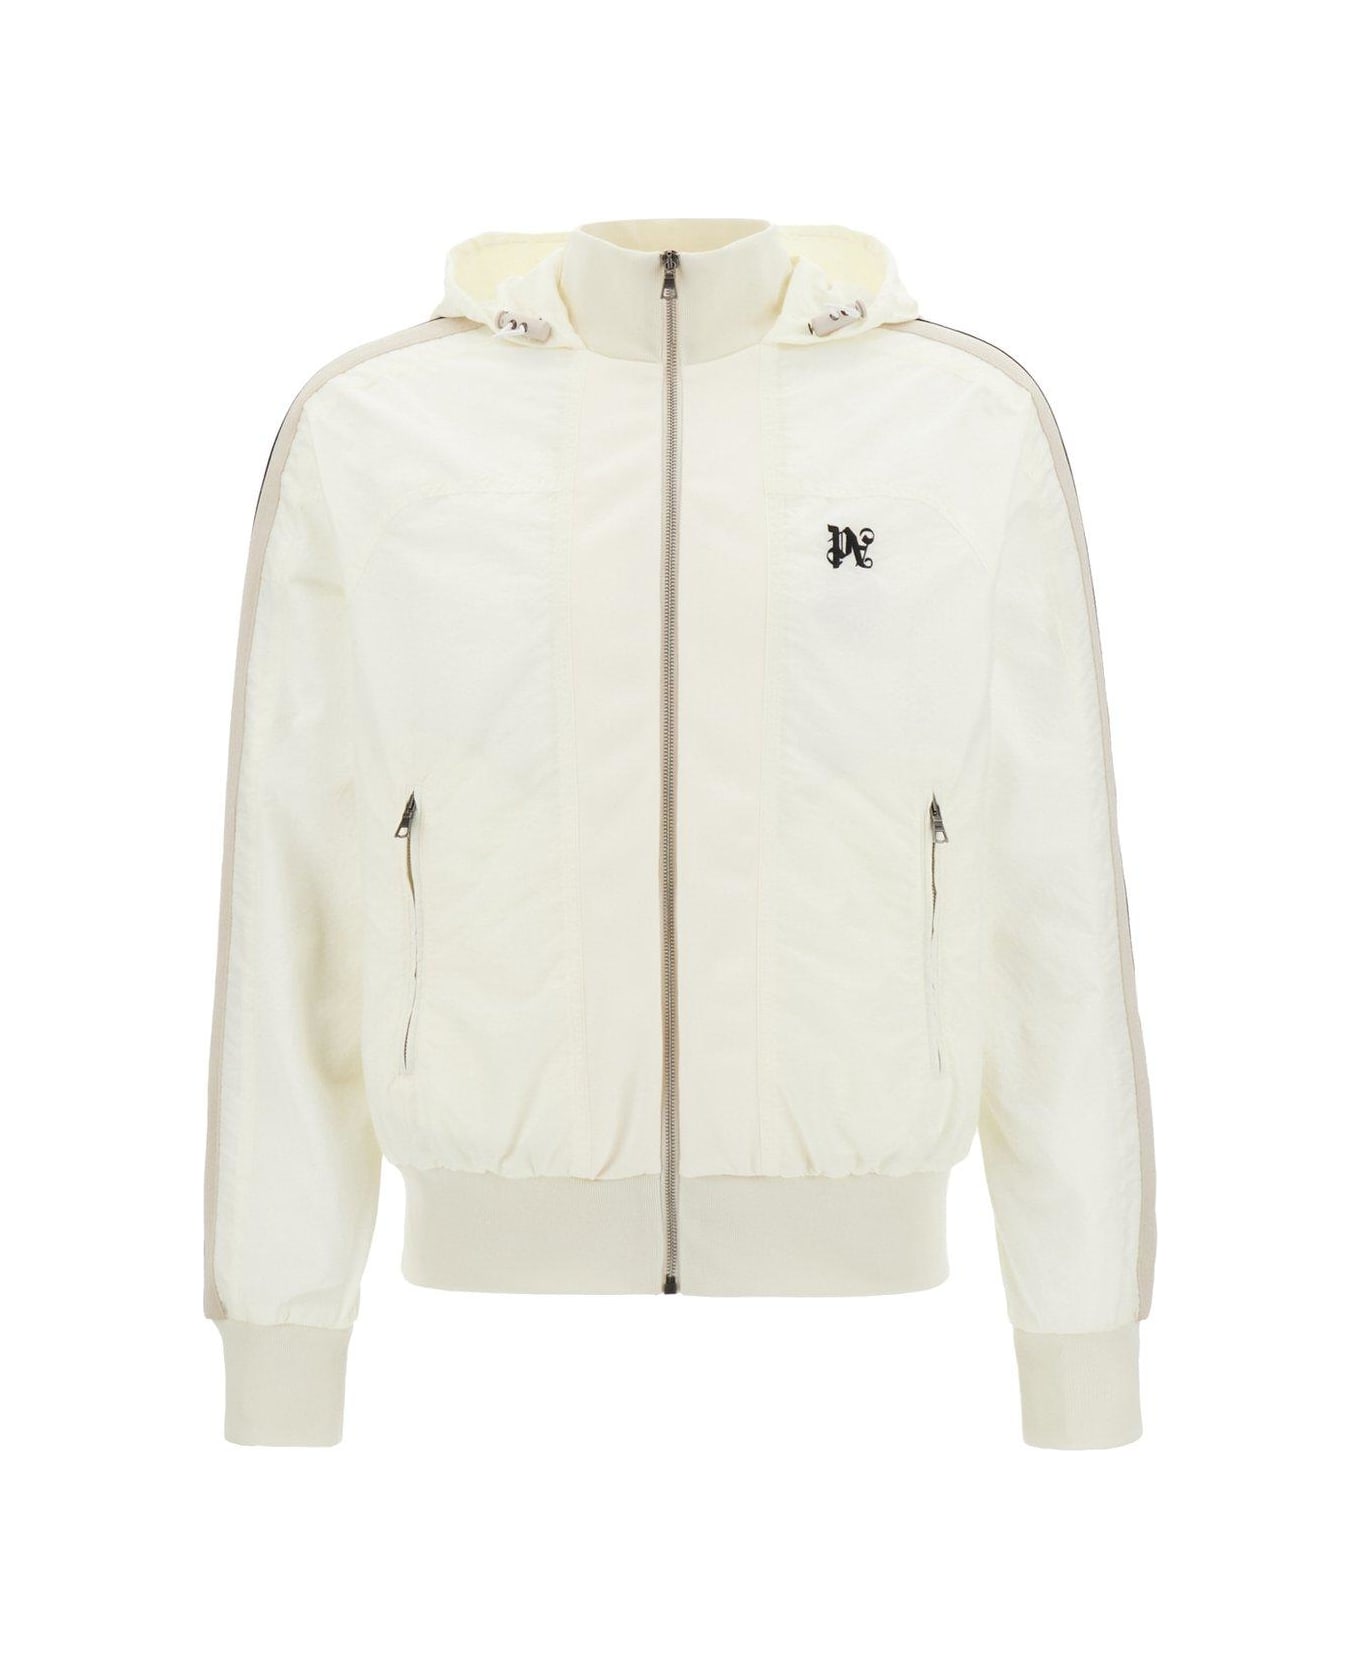 Palm Angels Logo Embroidered Hooded Jacket - Off-White/Black